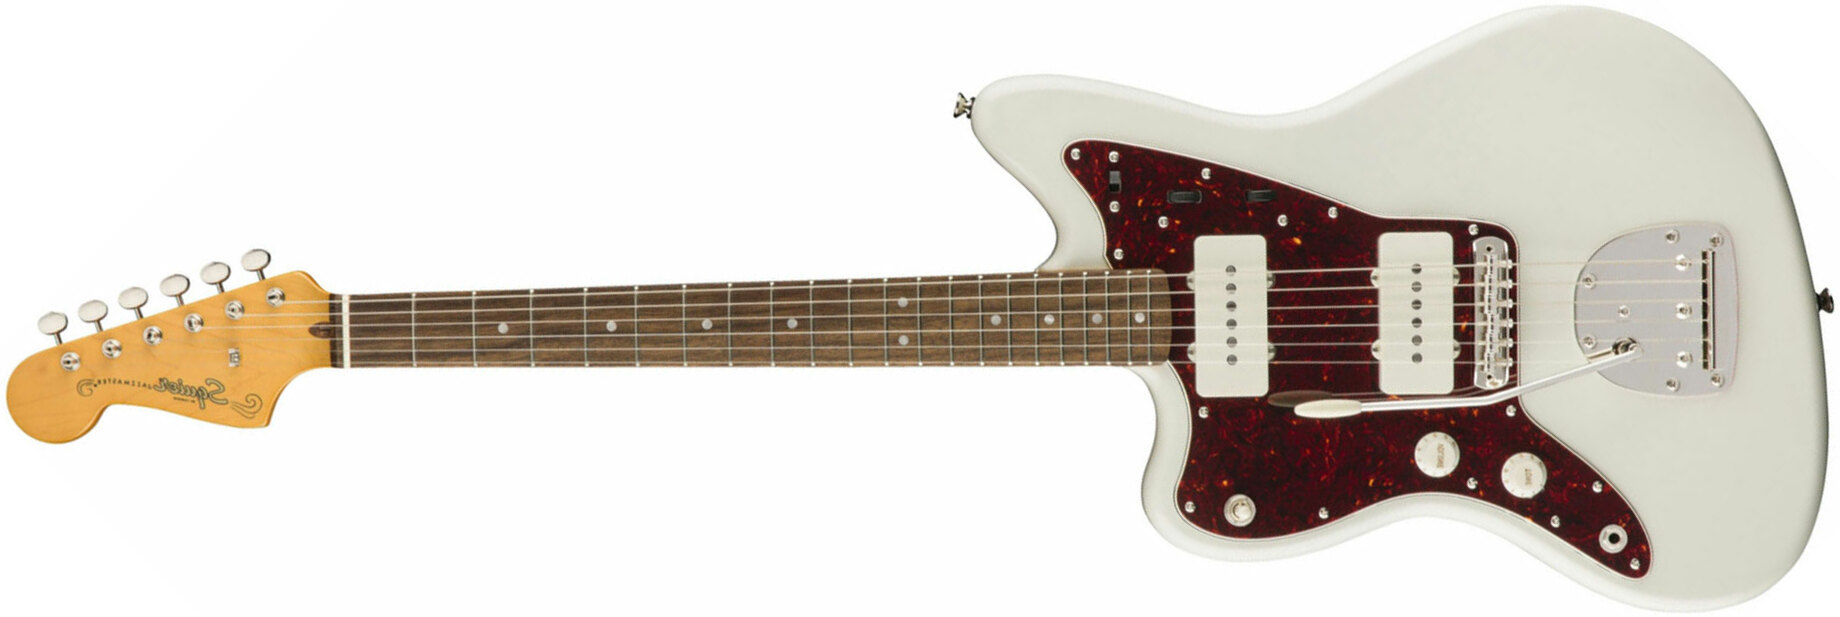 Squier Jazzmaster Classic Vibe 60s 2019 Lh Gaucher Lau - Olympic White - Left-handed electric guitar - Main picture